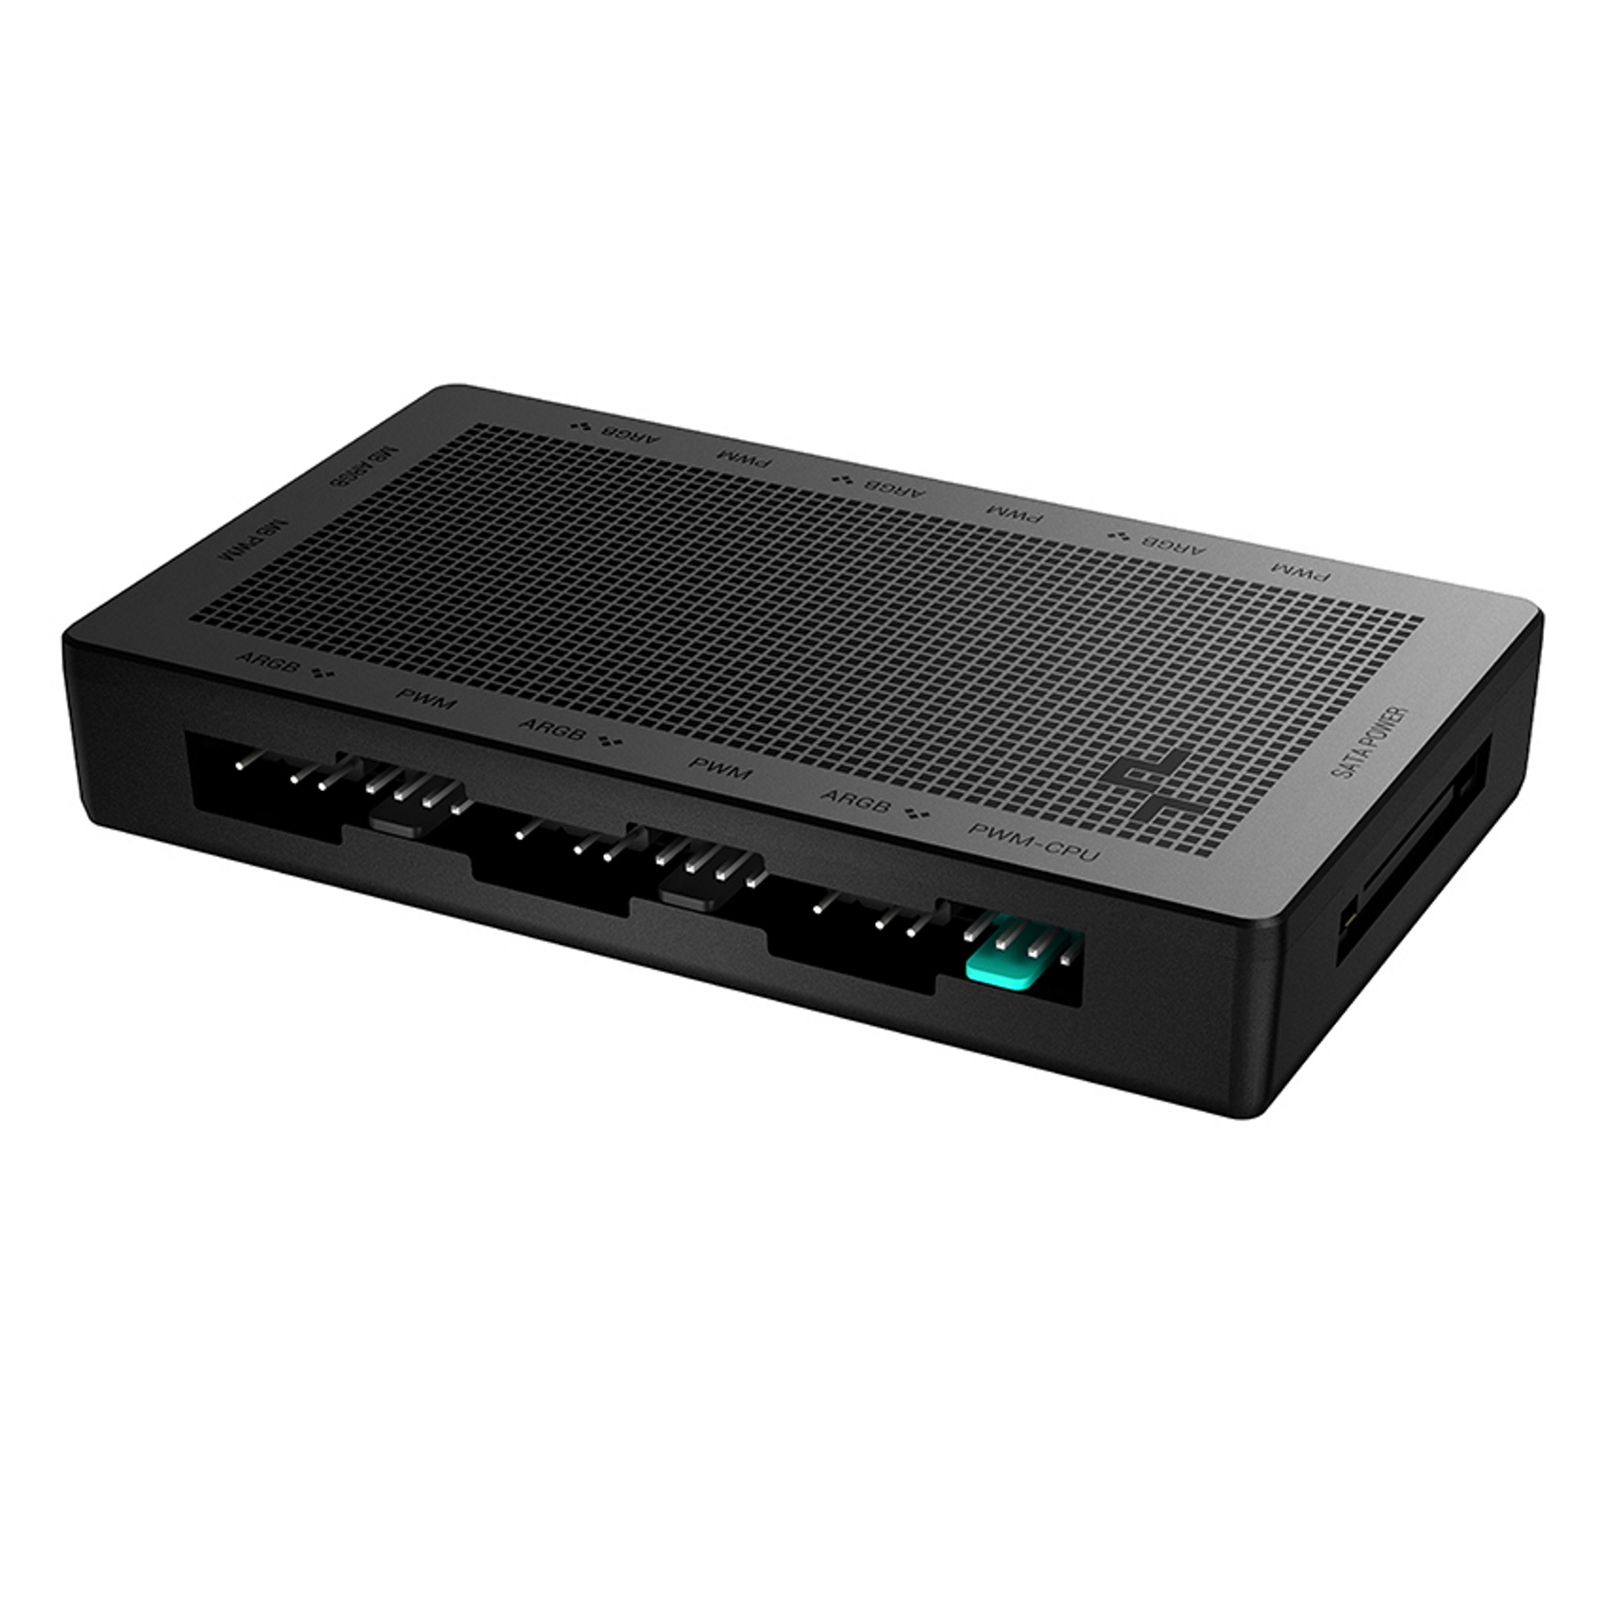 DeepCool SC790 2-in-1 Addressable RGB & PWM Fan Hub, 6-Port, Connect up to 6 PWM ARGB 3-Pin Fans Simultaneously While Occupying Minimal Motherboard Headers, Magnetic for Easy Installation